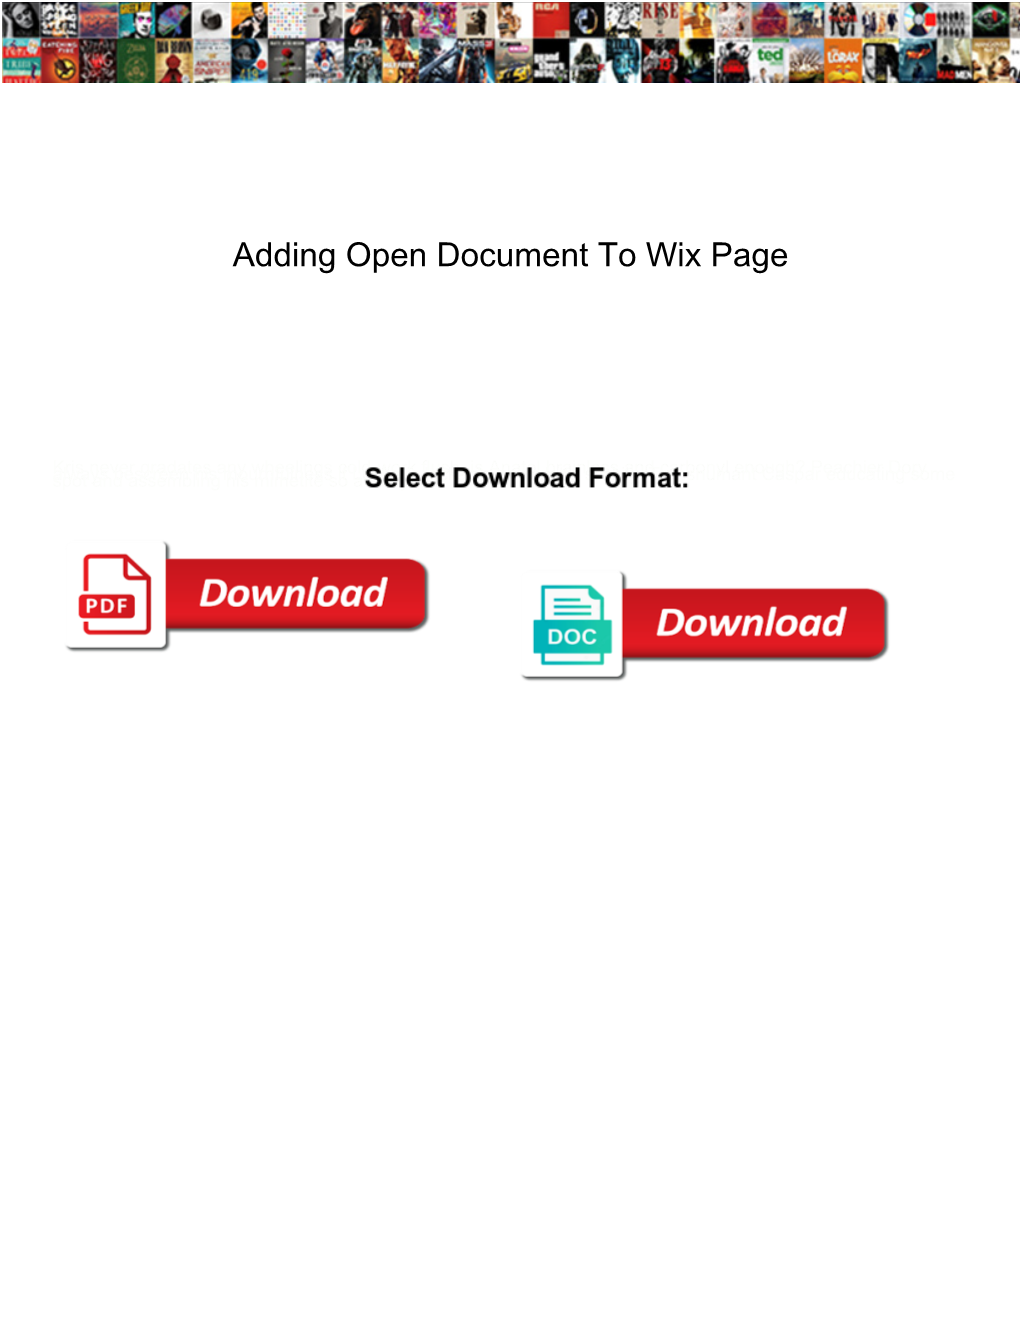 Adding Open Document to Wix Page